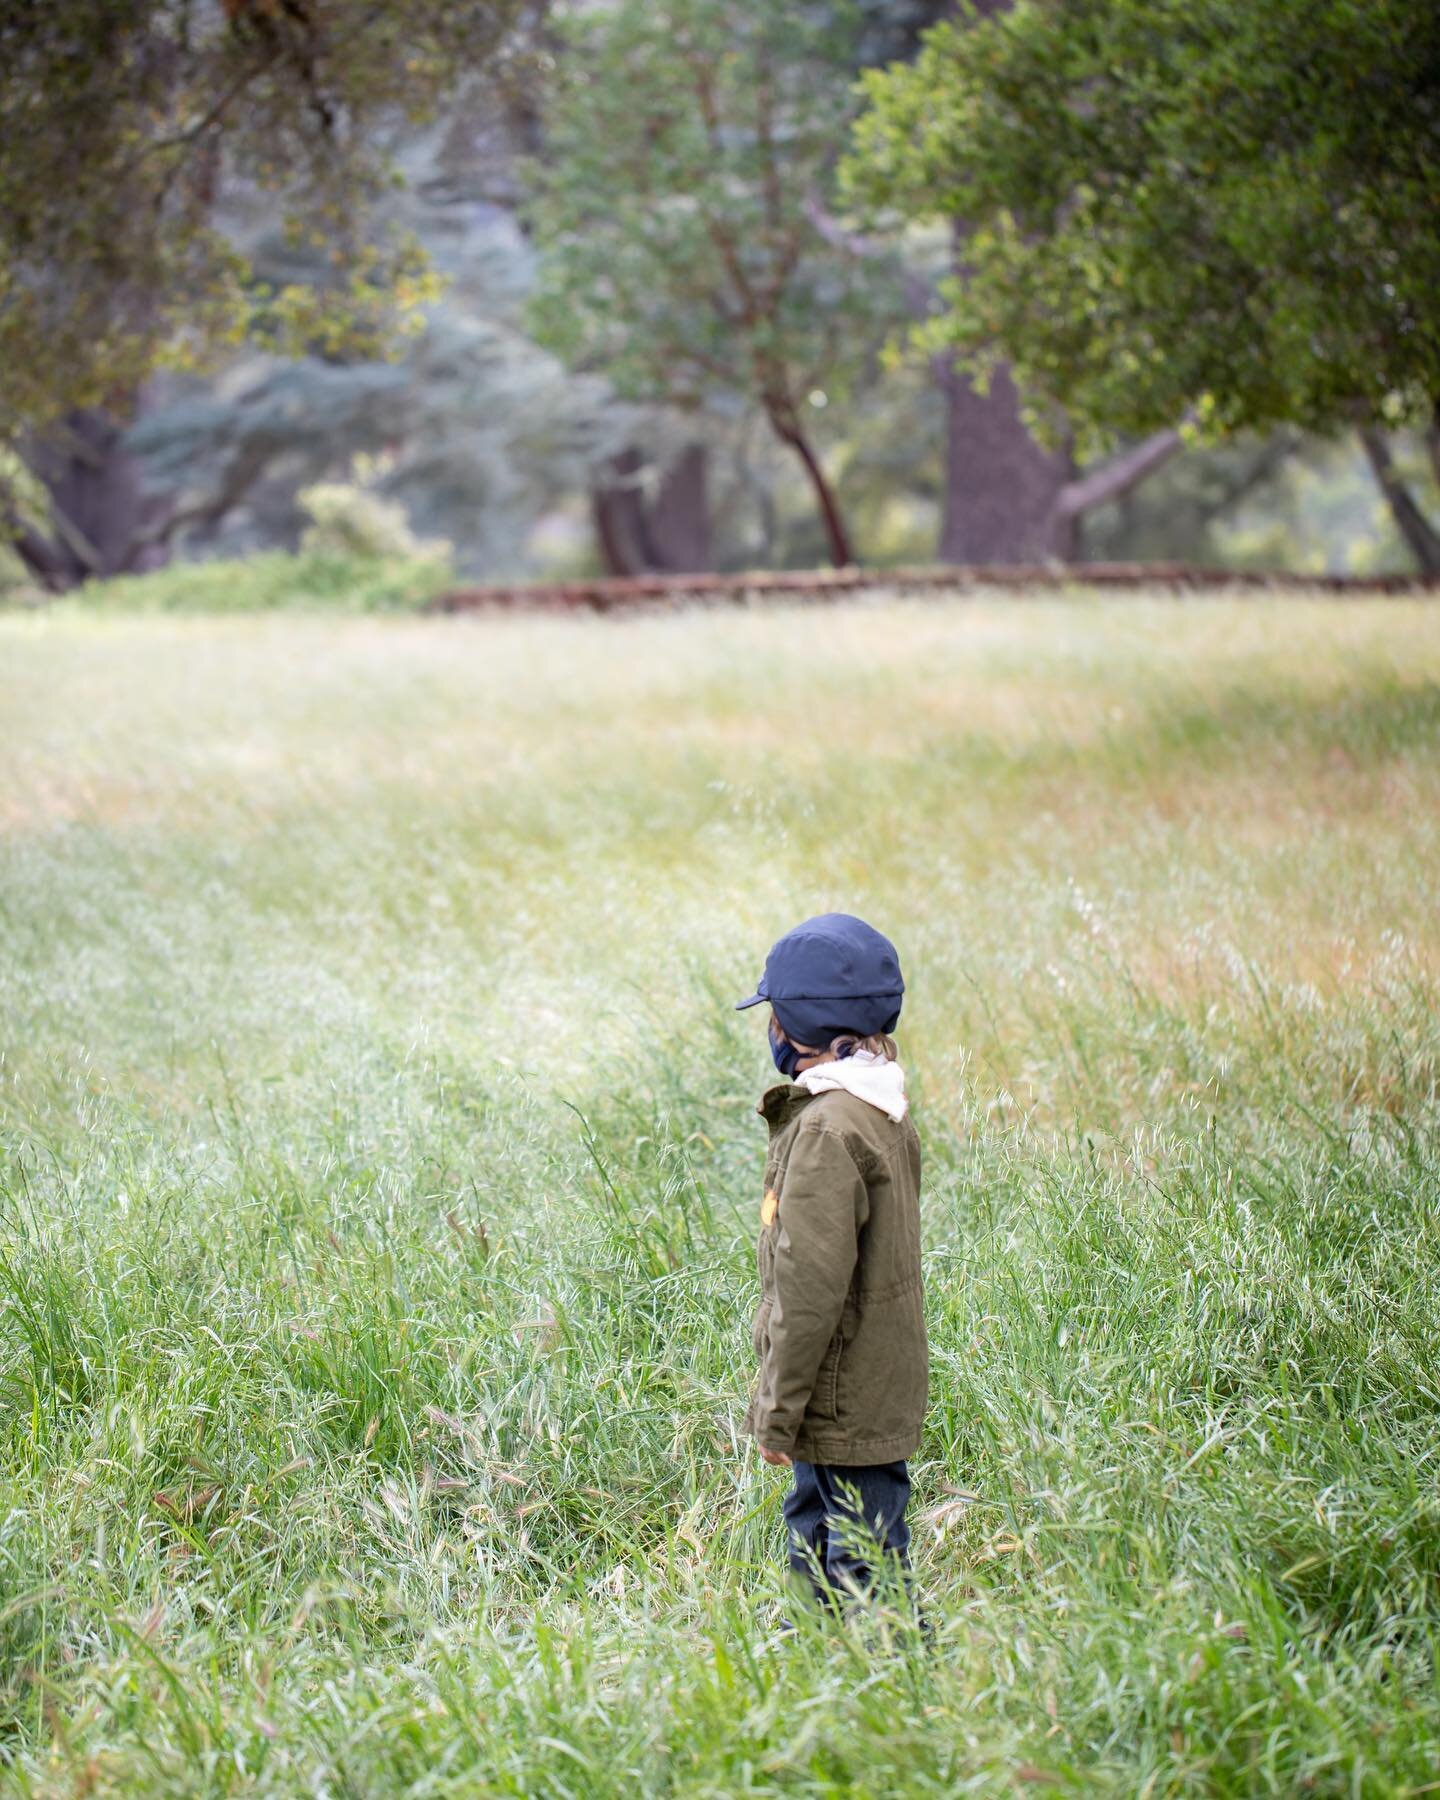 March forth, cutie pies! Today is literally commanding us to walk. 
🌿🌿
When you are out in nature, do you like to stick to the trail or be free to explore off the trail? ￼
🌿🌿

#filoli
#letthemexplore
#natureconnection
#vitaminN
#optoutside
#bayar